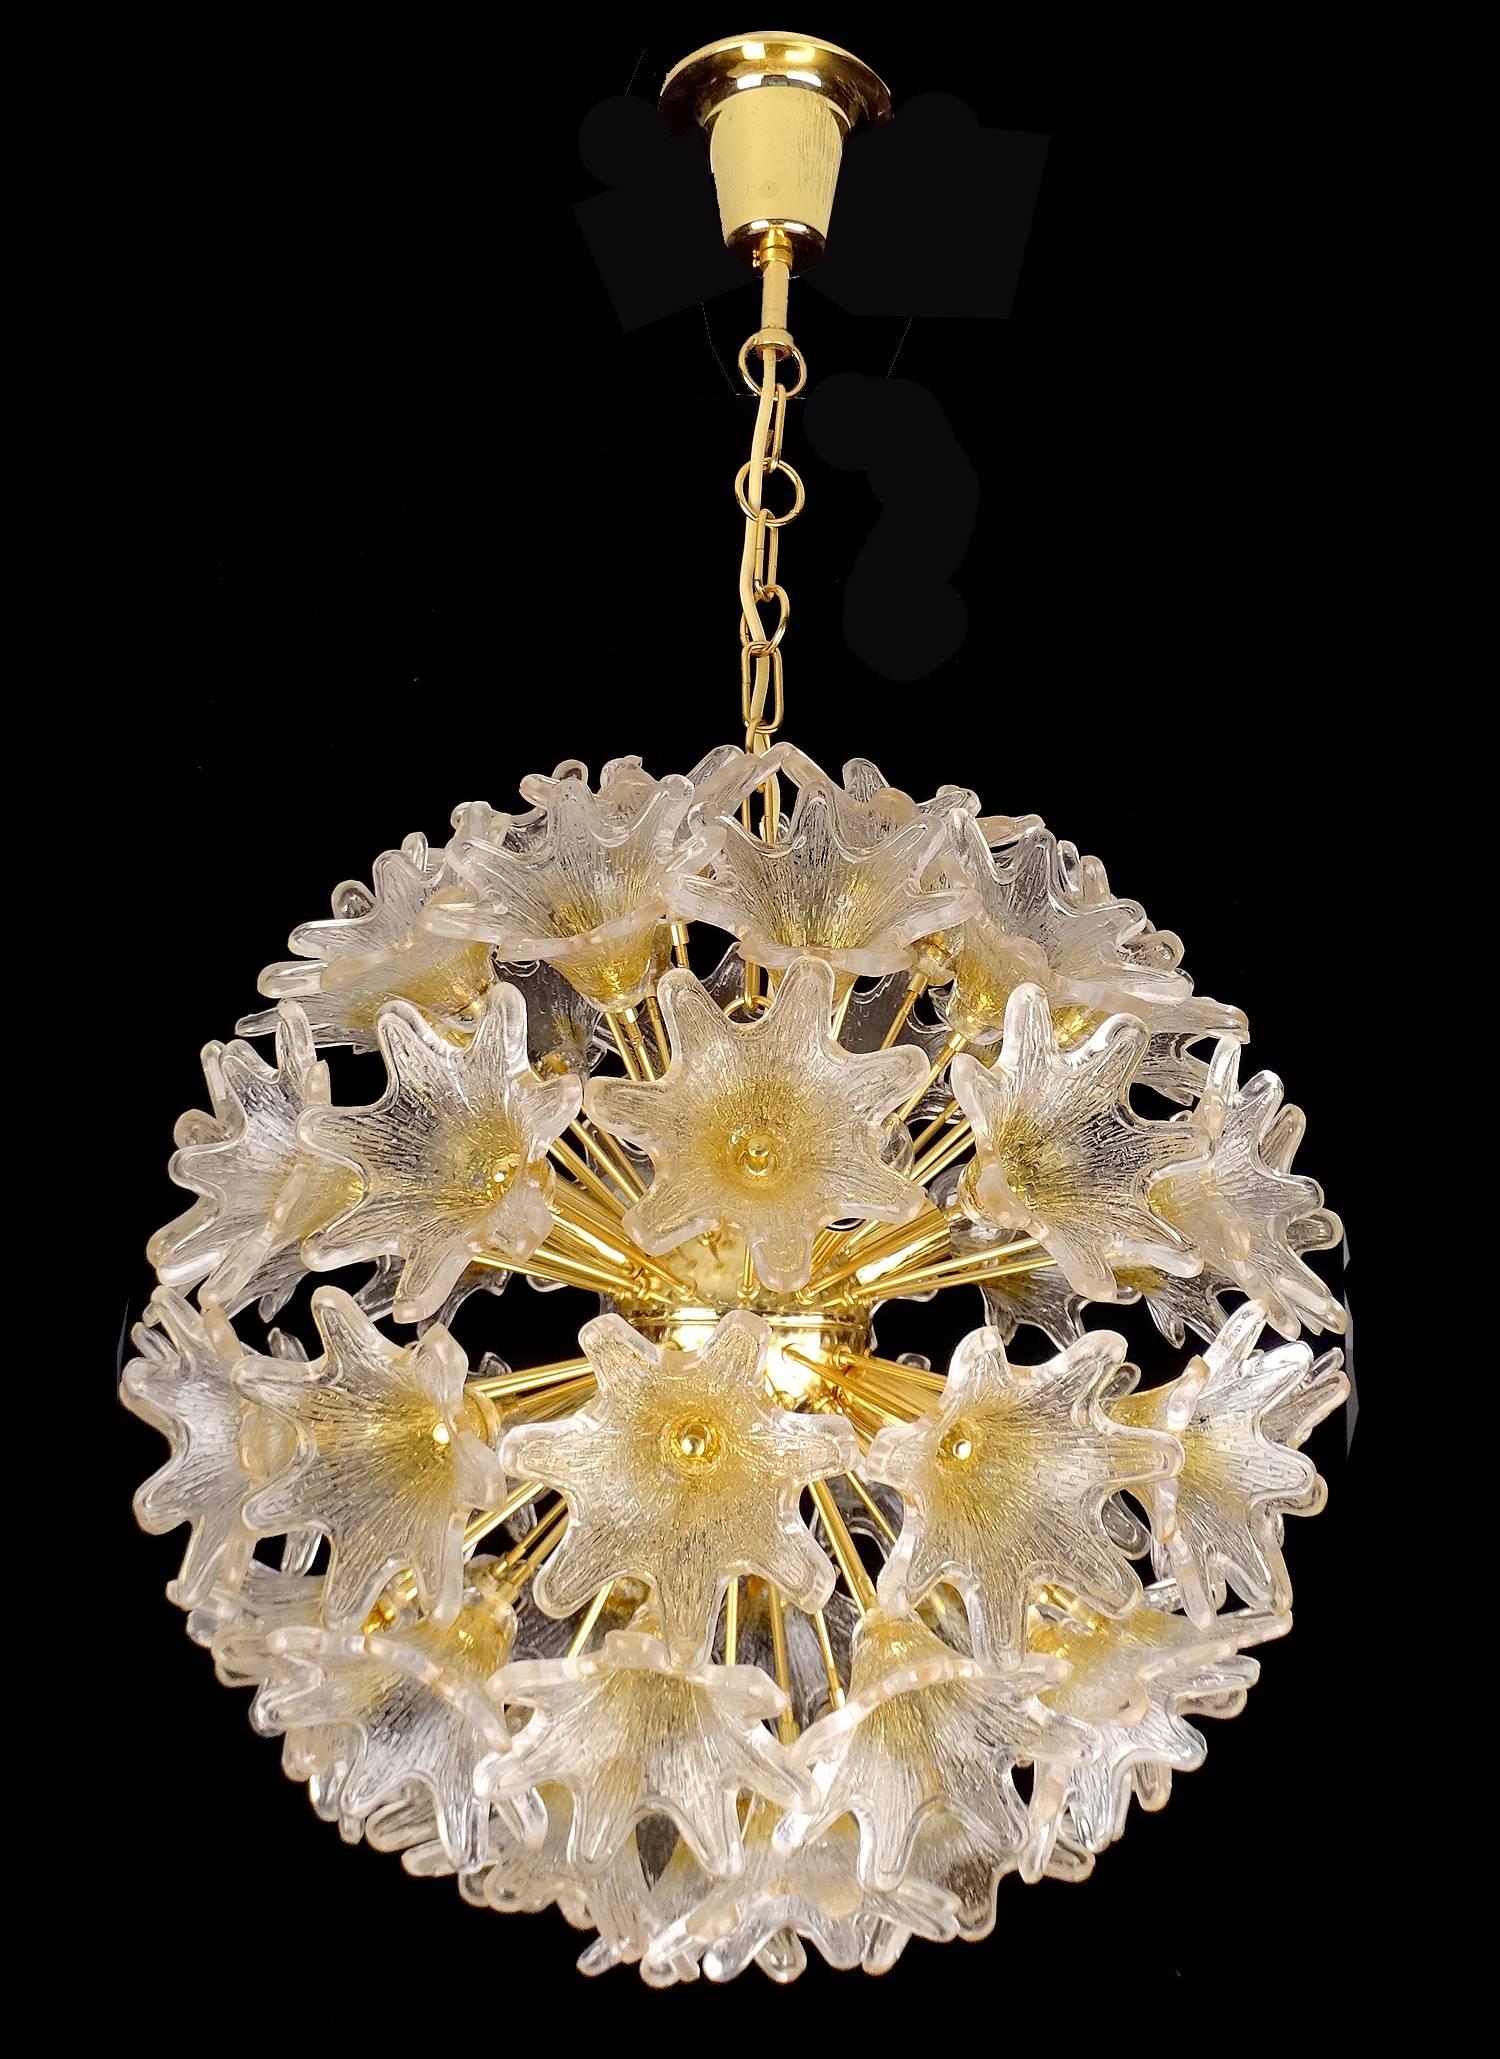 Stunning  Floral sunburst / starburst  chandelier by VeArt Venini featuring multiple Murano glass flowers on a brass structure . 

Dimensions
34.65 in H / 88 cm H
Diameter
19.68 in. (50 cm)

Eight candelabra size bulbs, 40 watts each. LED